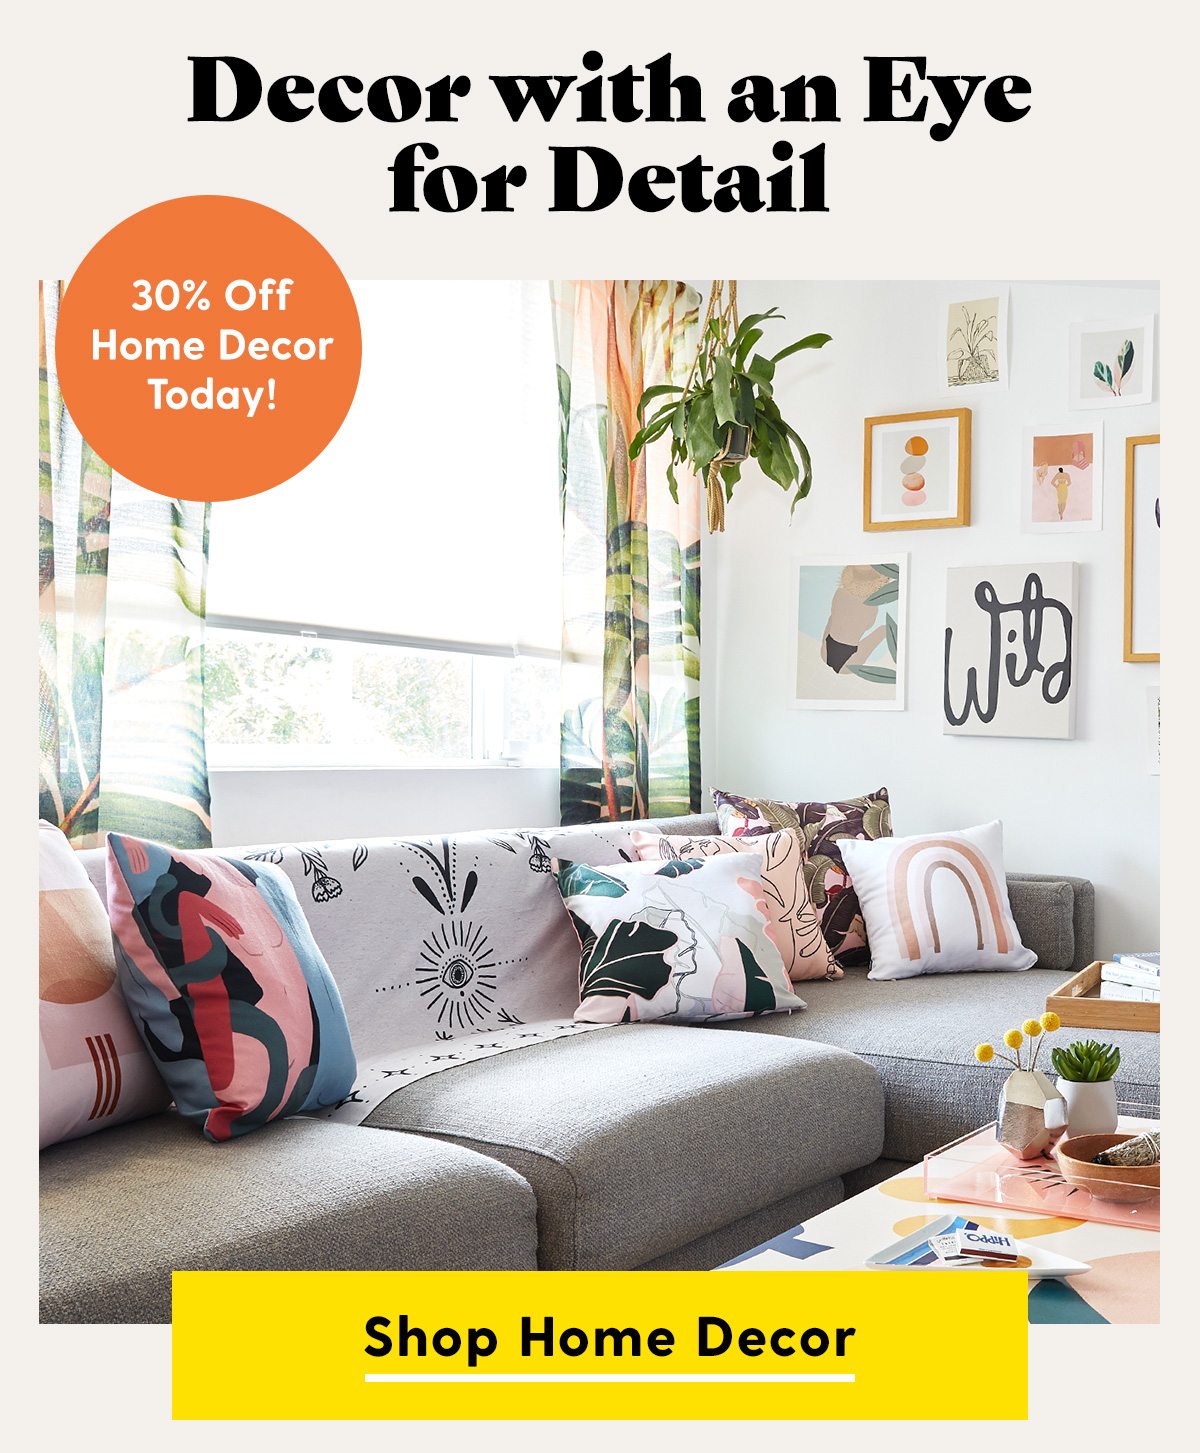 30% Off Home Decor Today!